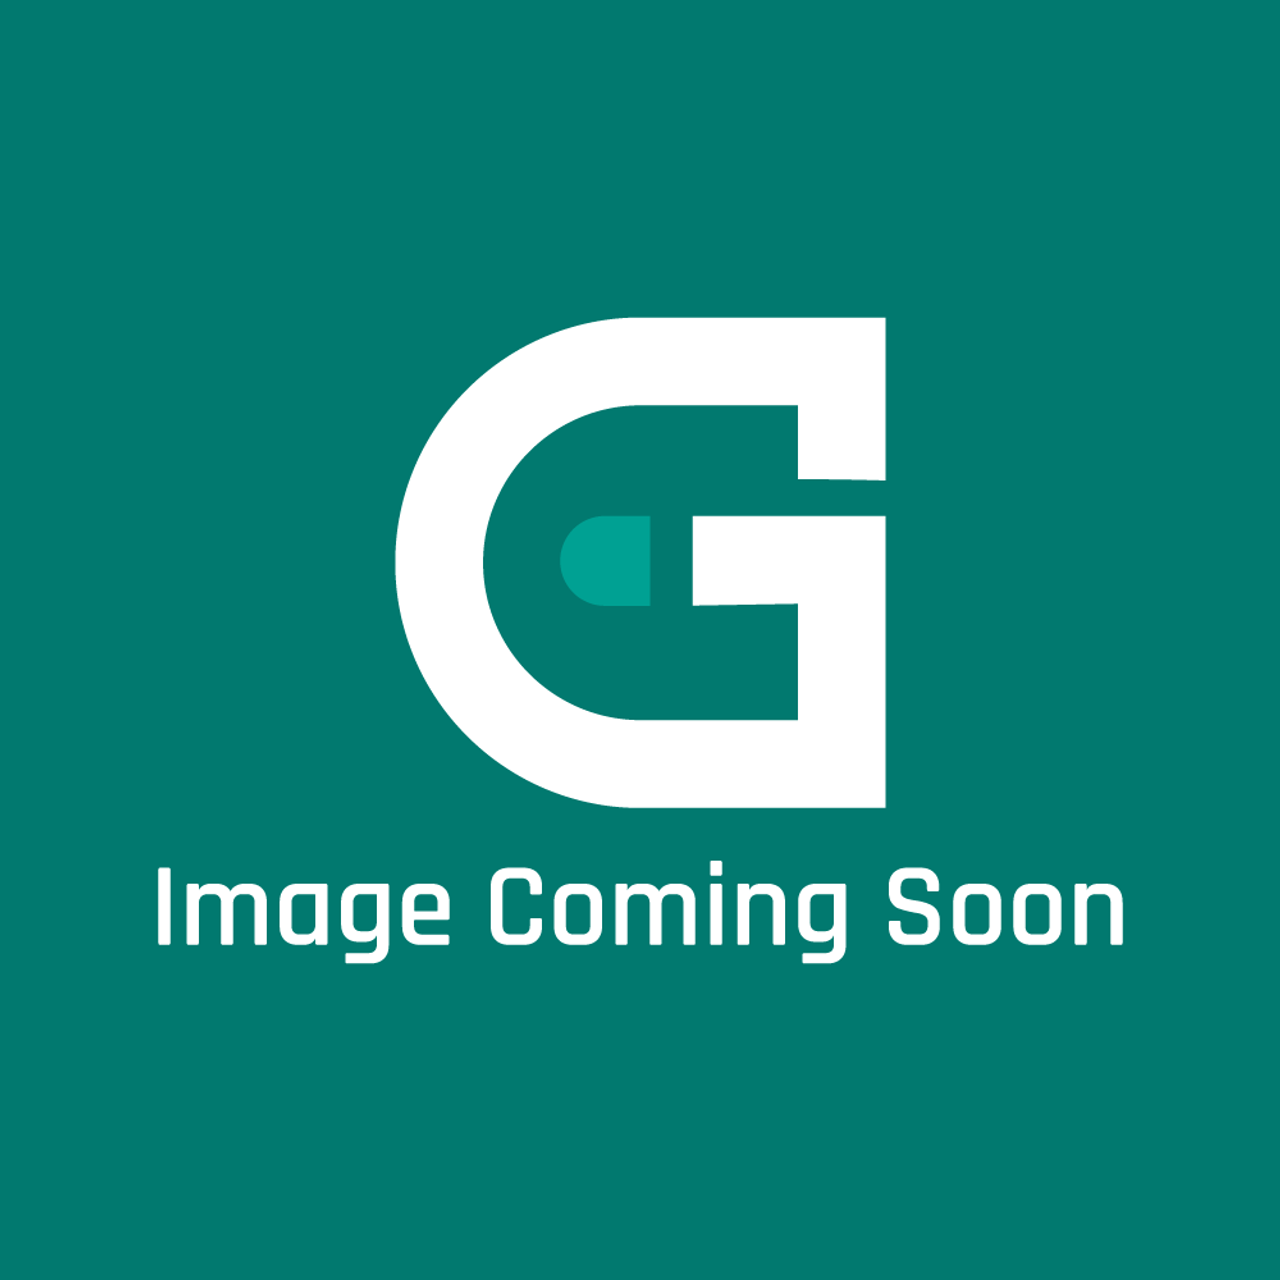 AGA Marvel MADH26646 - Compound Rs Ref 554-311 - Image Coming Soon!